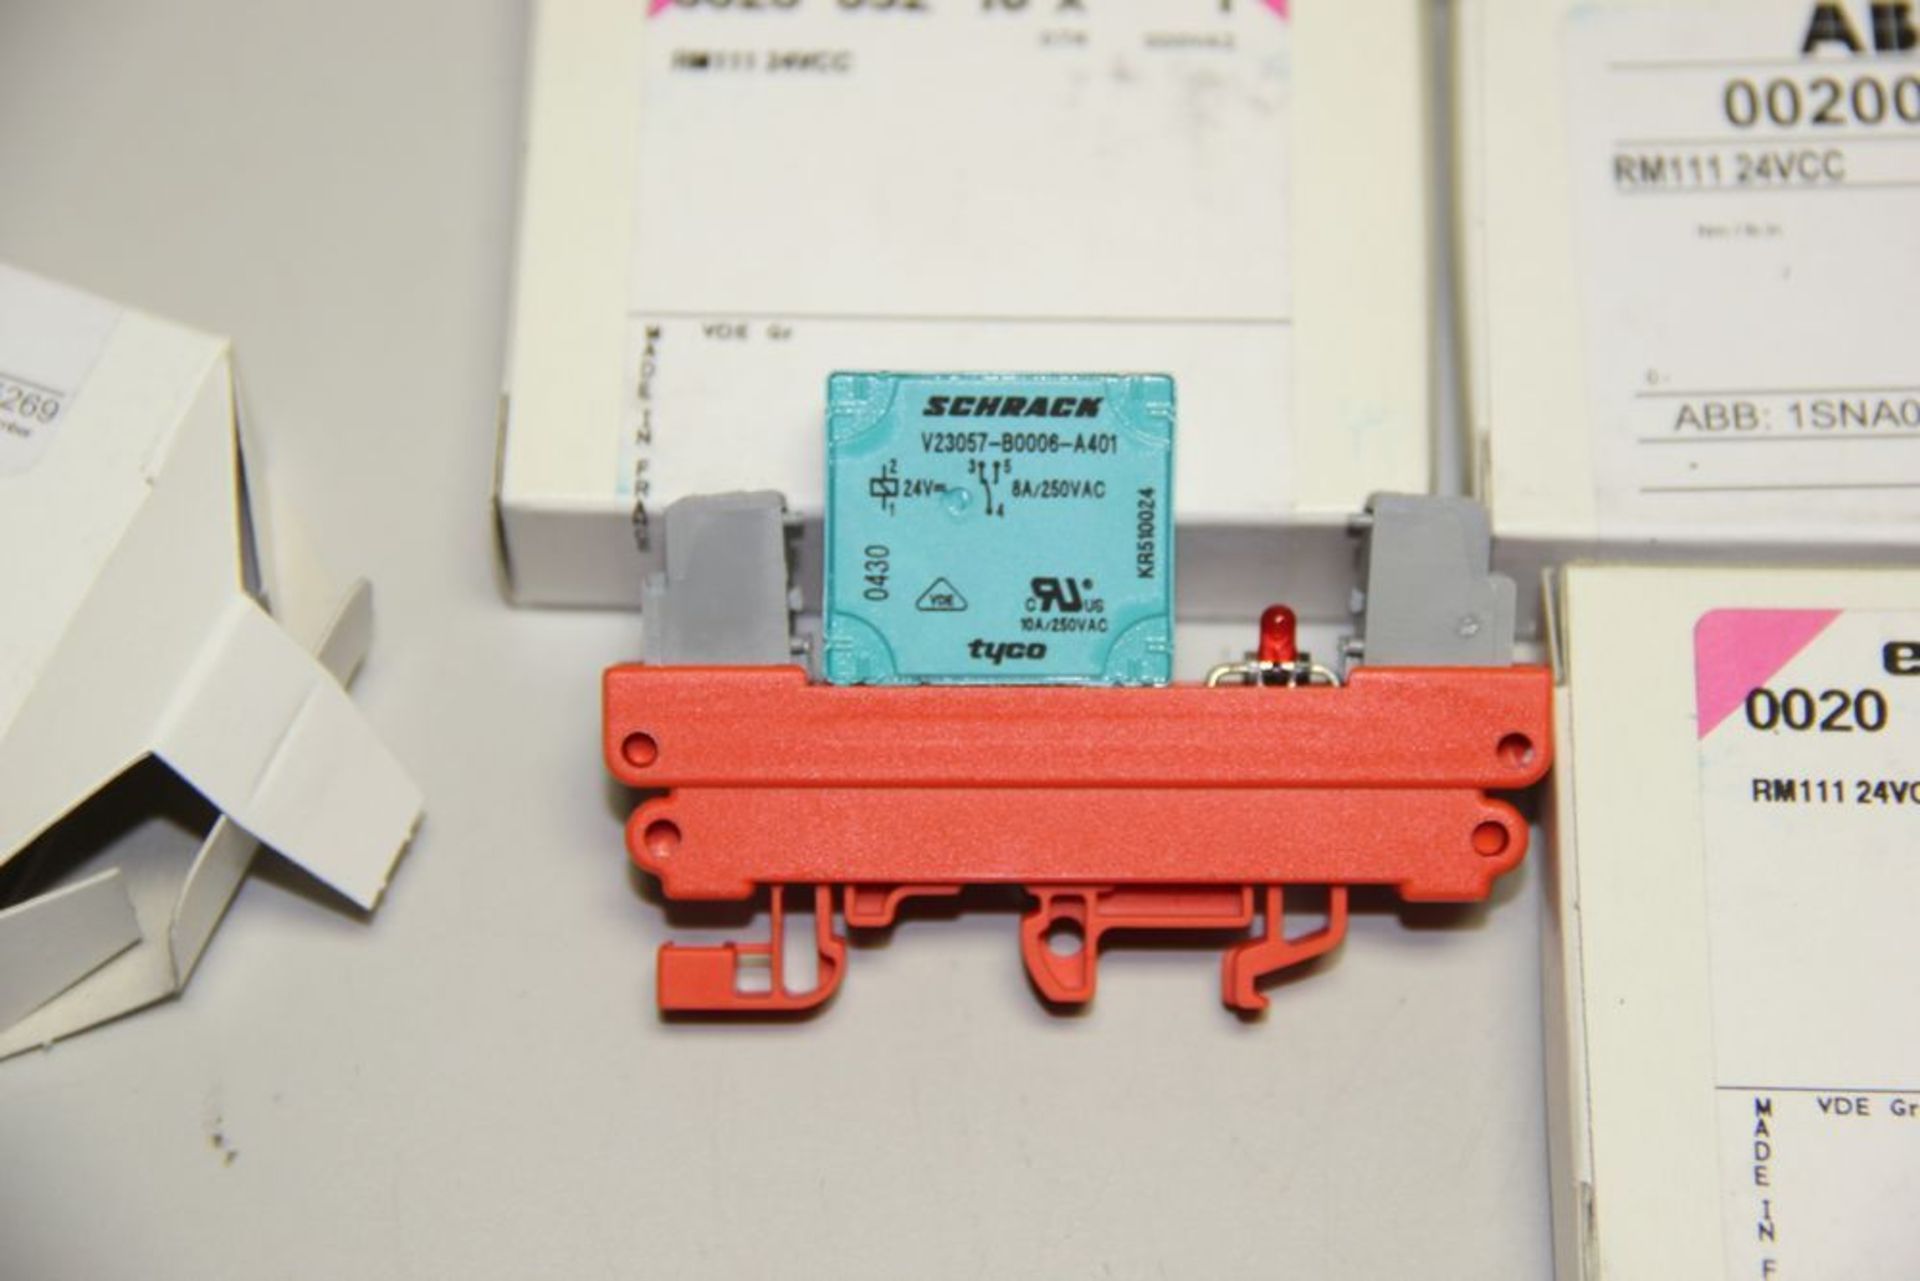 LOT OF NEW ABB ENTRELEC NON-LATCHING RELAY MODULES - Image 3 of 4